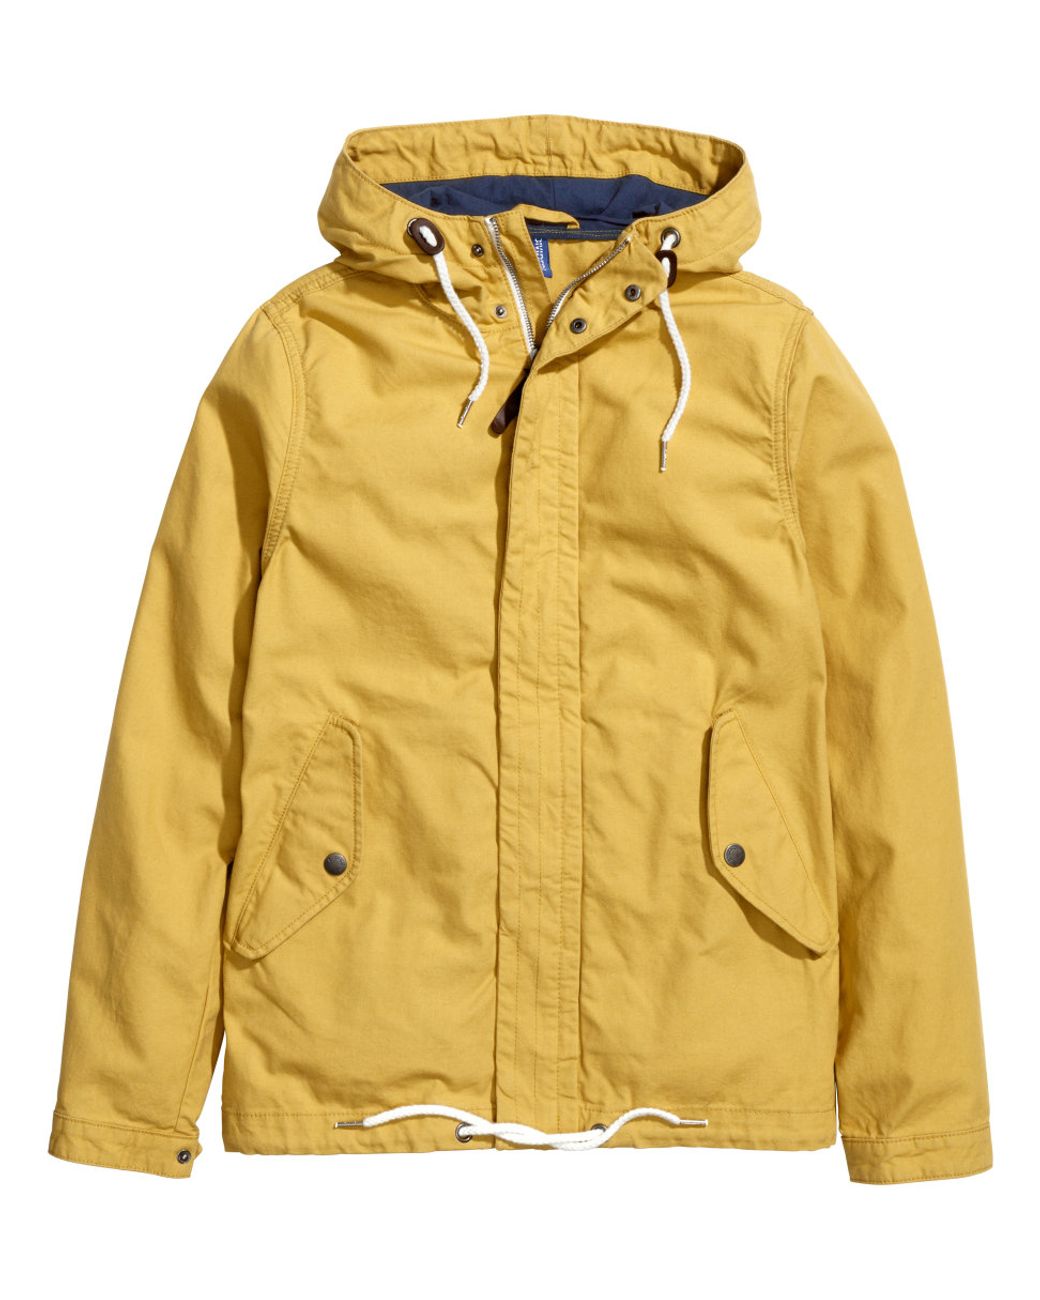 H&M Canvas Parka in Yellow for Men | Lyst